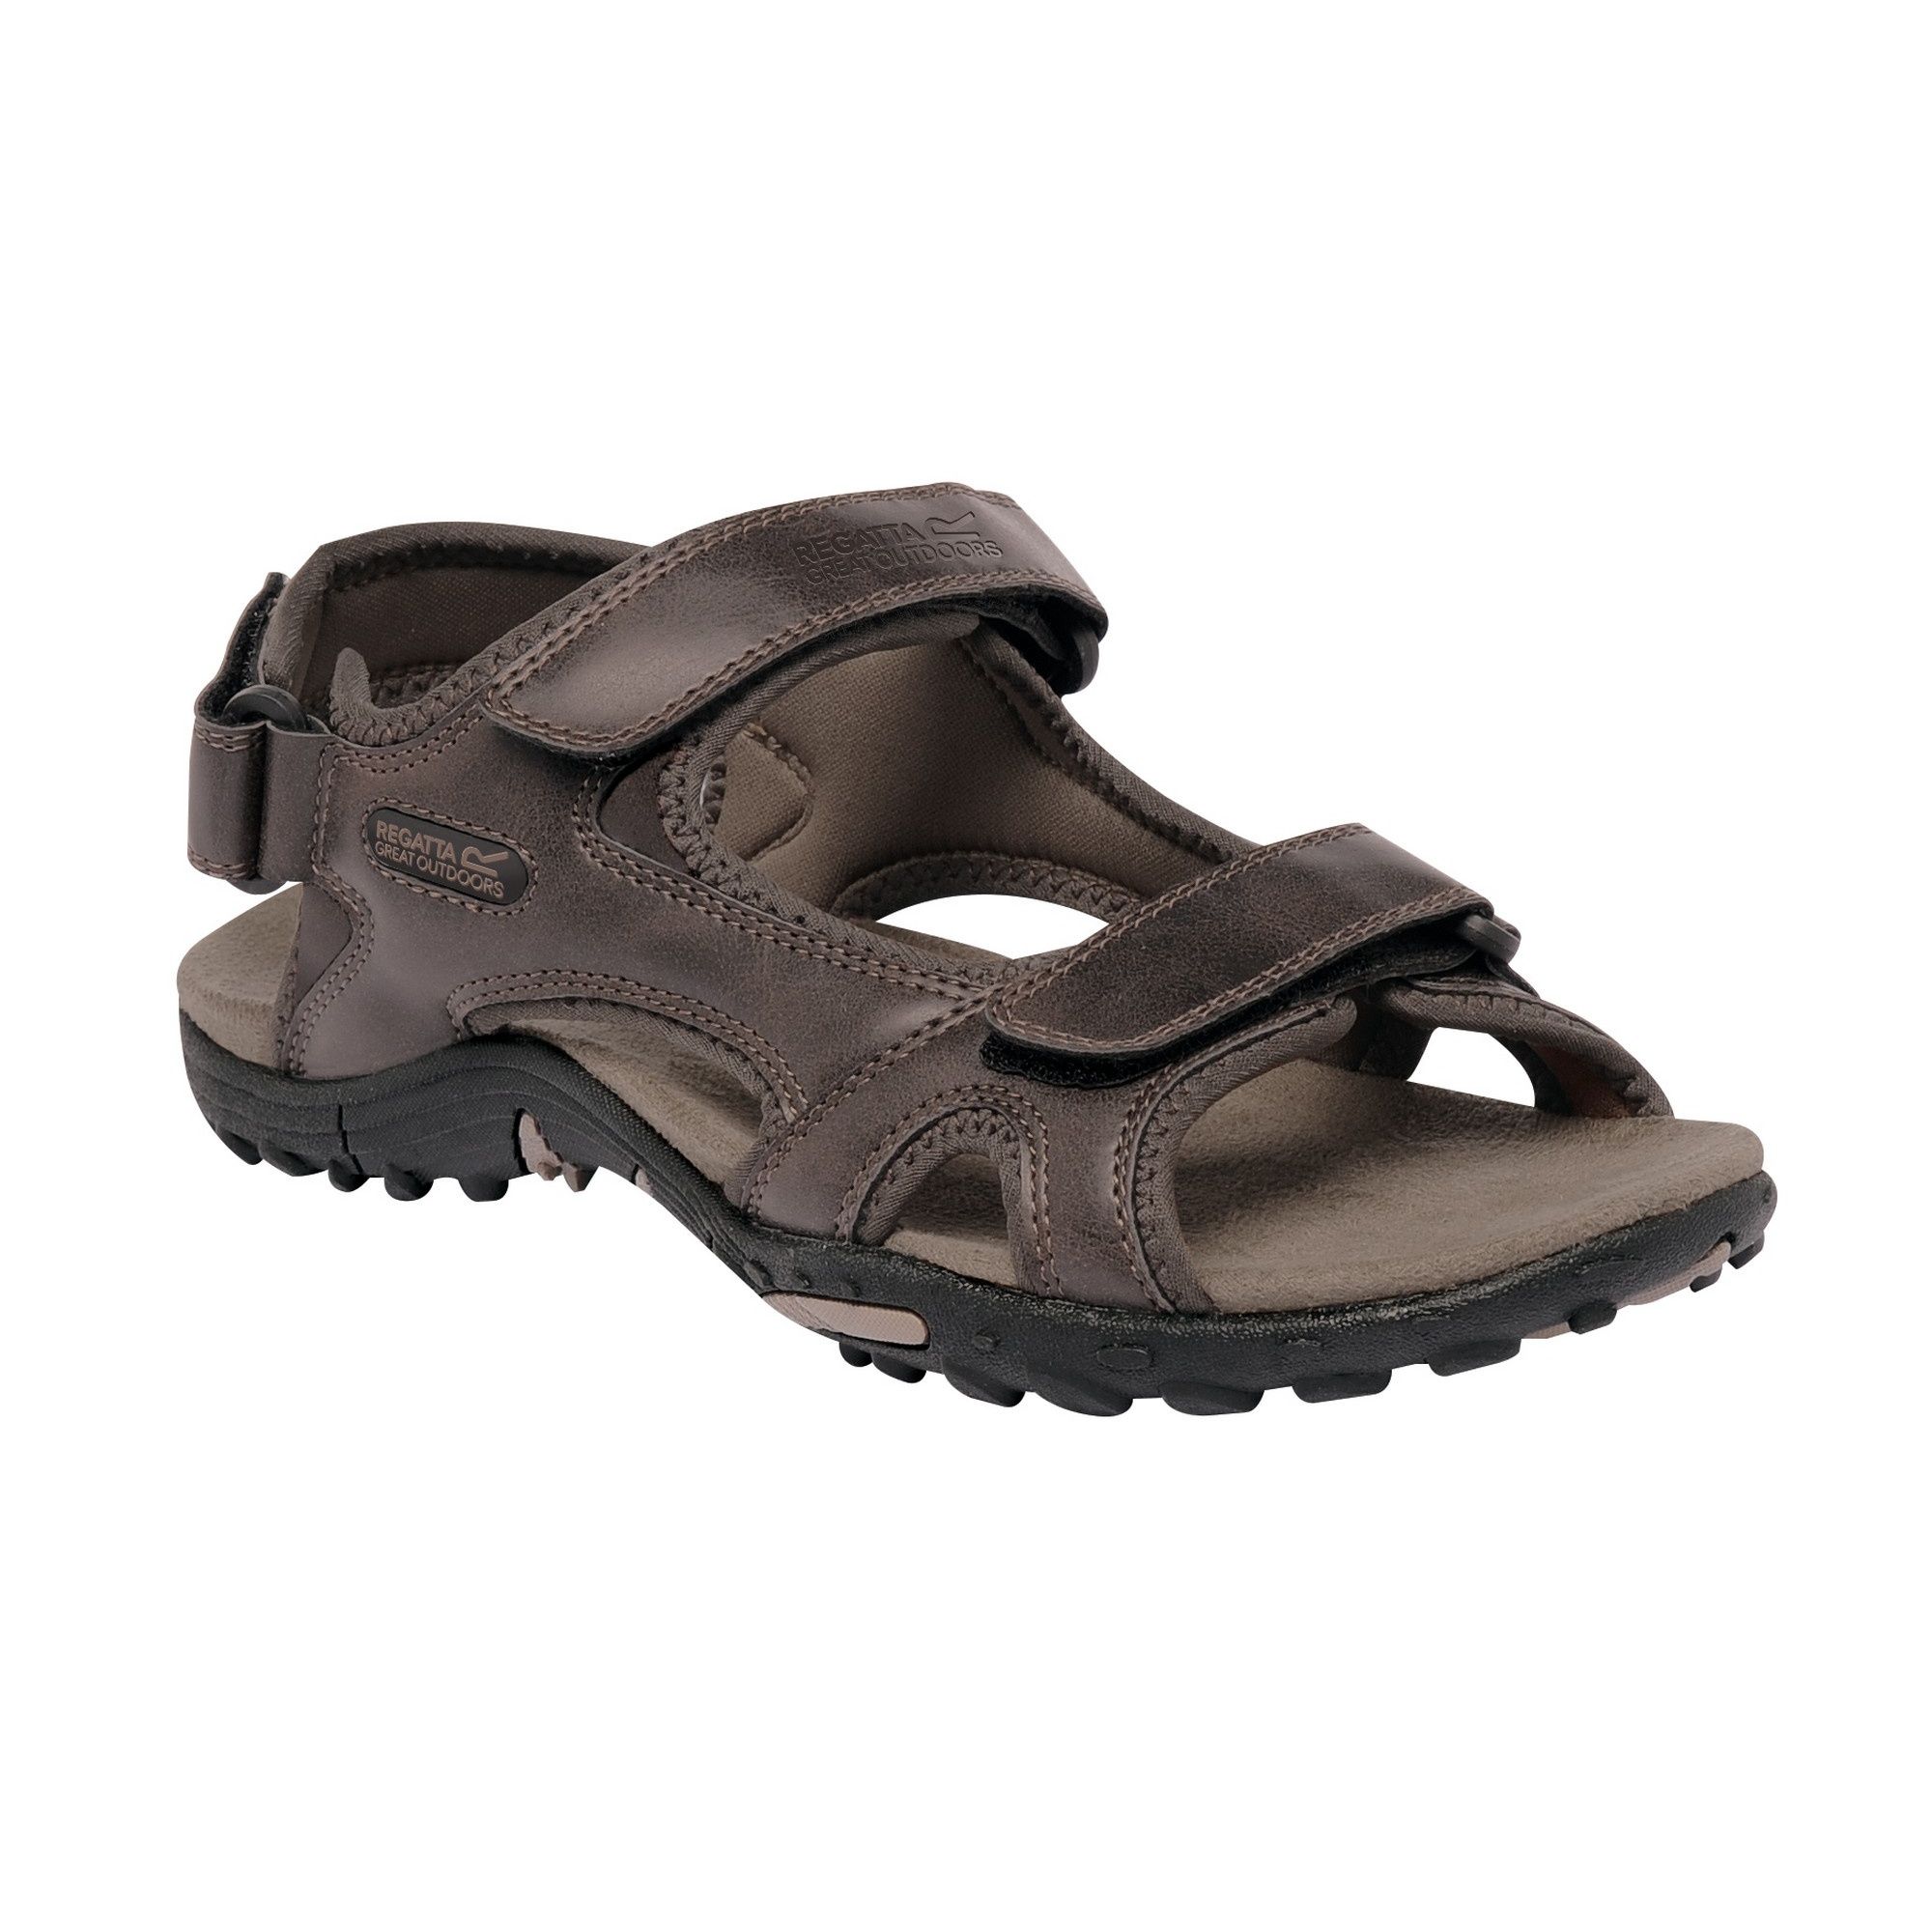 The Haris is our mens popular active sandal designed to keep your feet cool while offering plenty of support. The smooth PU upper is fully lined with soft and stretchy spandex to help prevent any nasty rubbing, and the backstrap is cushioned for extra comfort. All three straps can be adjusted for a perfect fit and the lightweight sole features a super-grippy, slip-resistant tread design. Complete with shock-absorbing cushioning in the midsole, the Haris sandal is perfect for holidays or day-to-day wear. Other Fibres/Materials (43%) Polyester (57%).